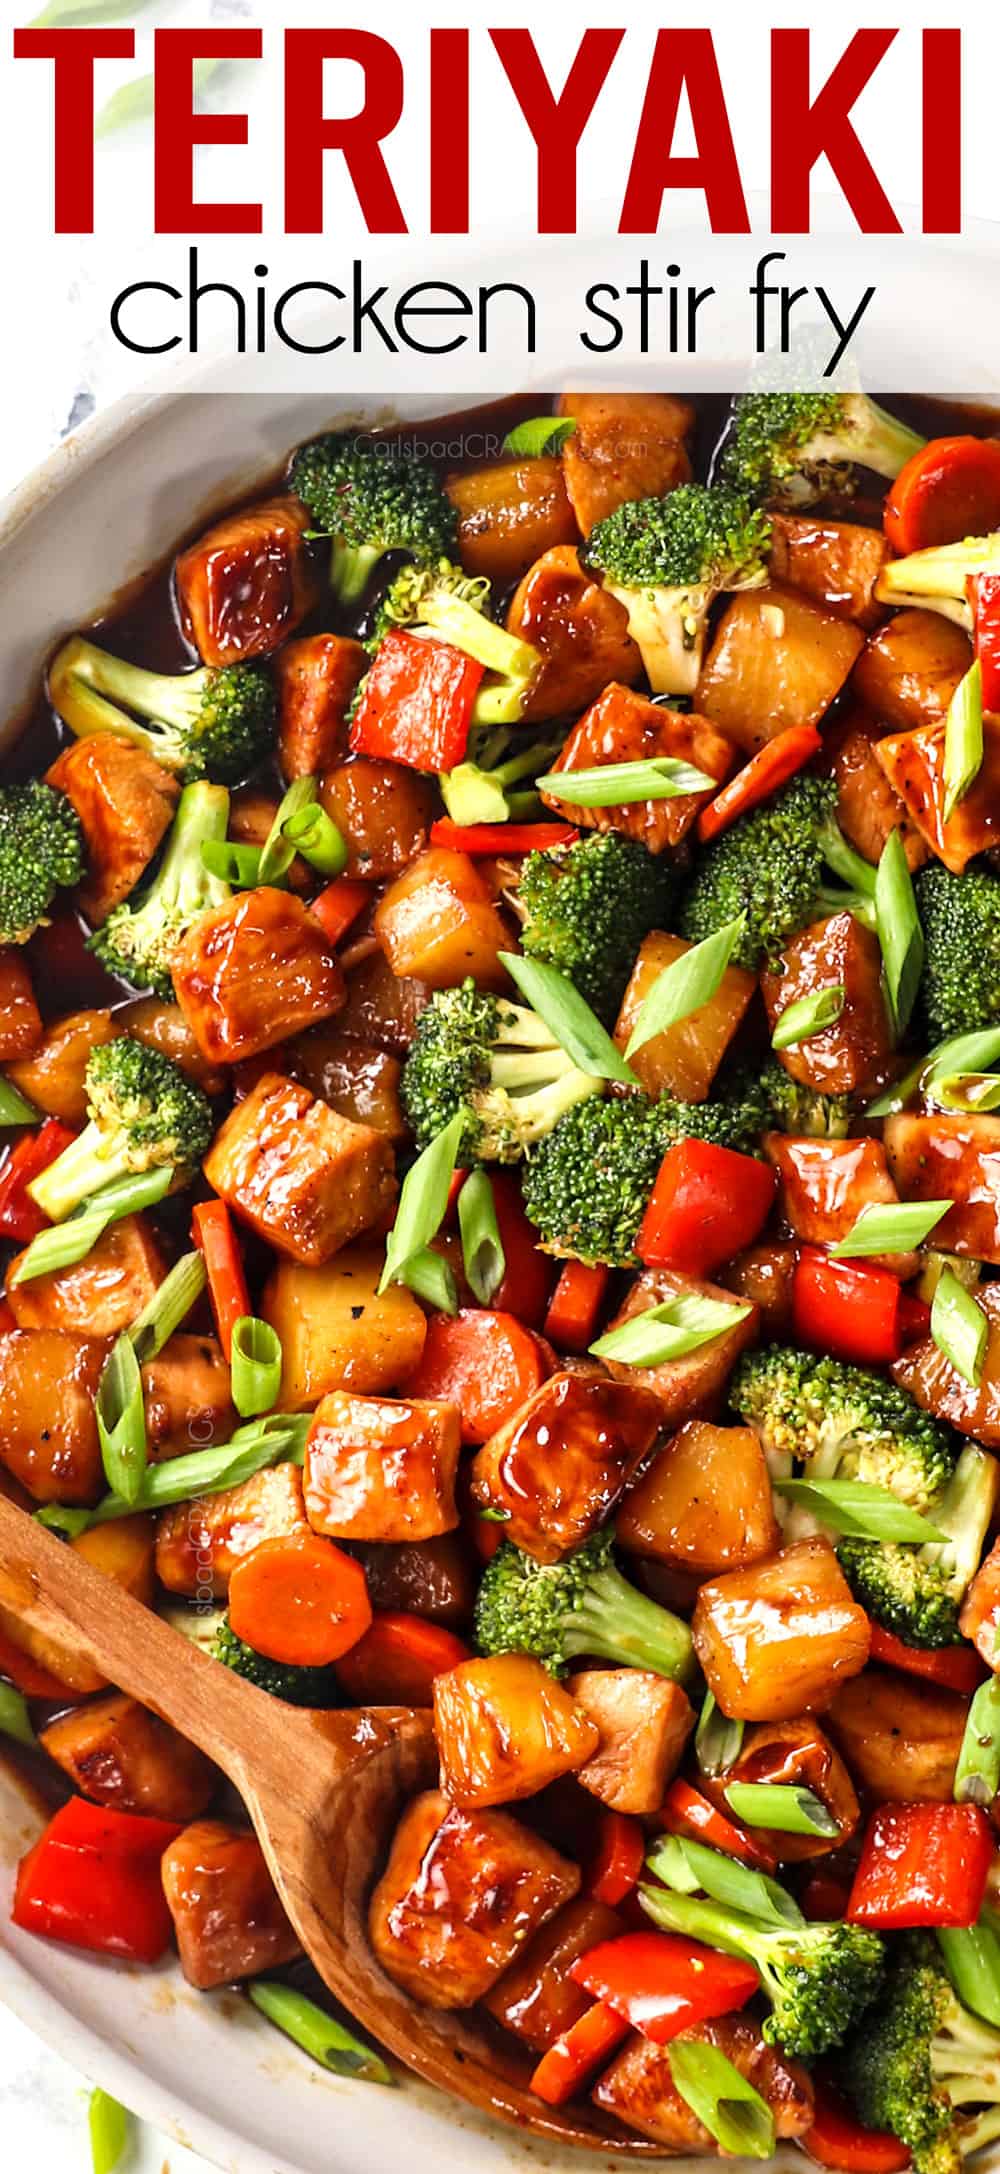 top view of teriyaki chicken stir fry recipe with chicken, broccoli, bell peppers and pineapple in a skillet